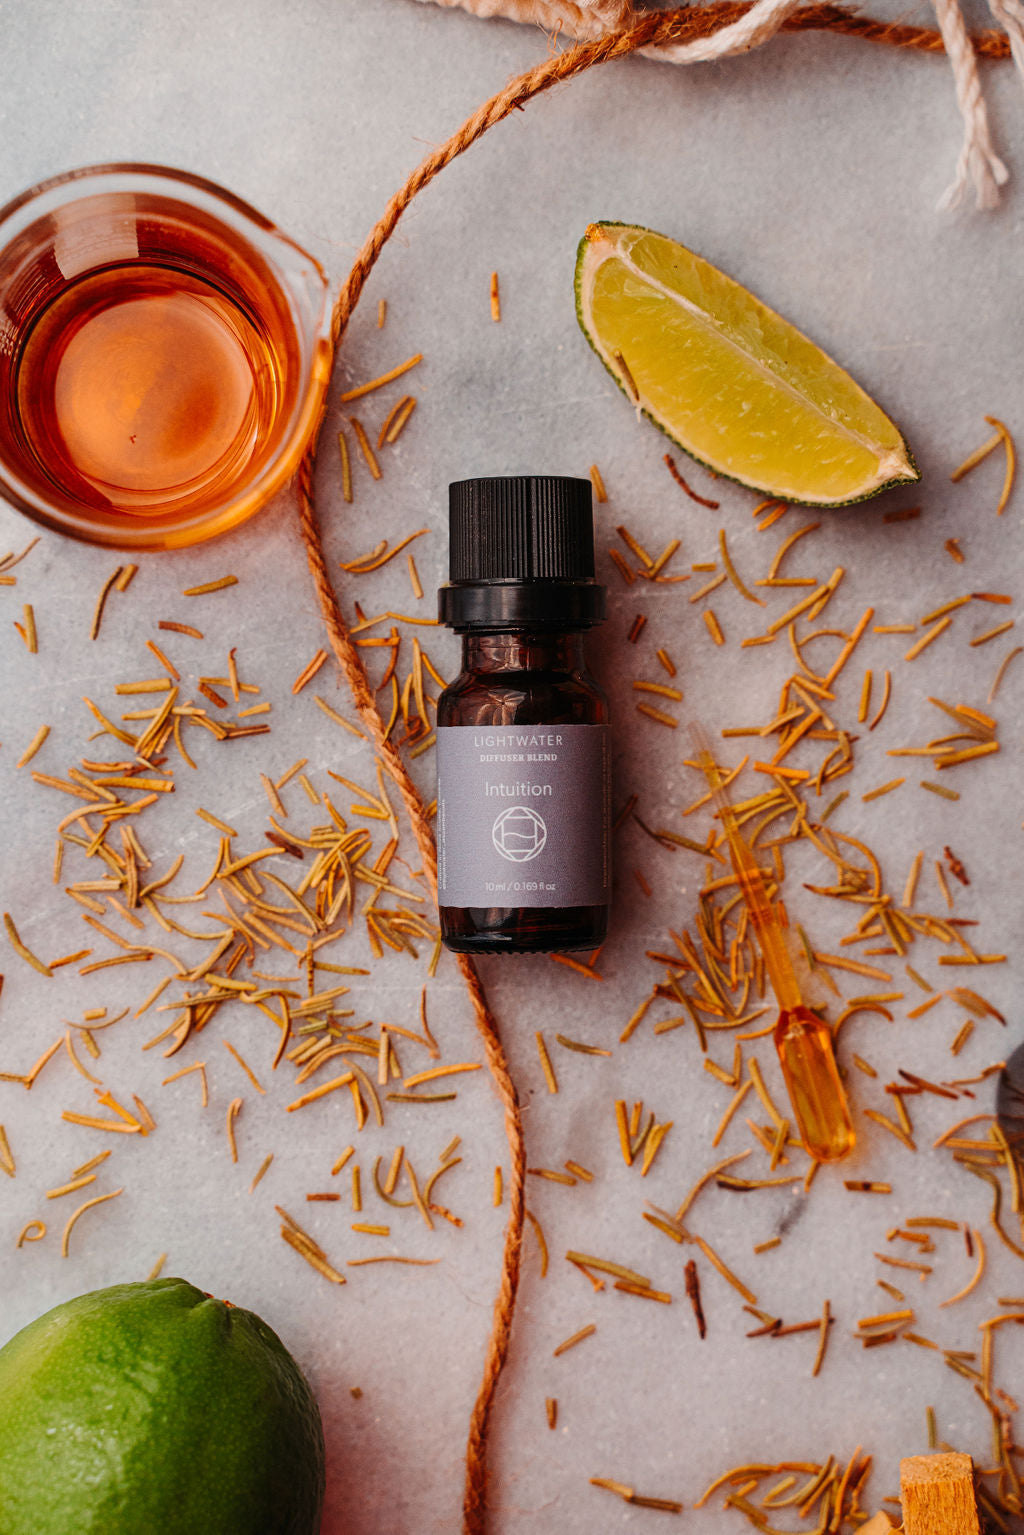 Intuition Essential Oil Blend